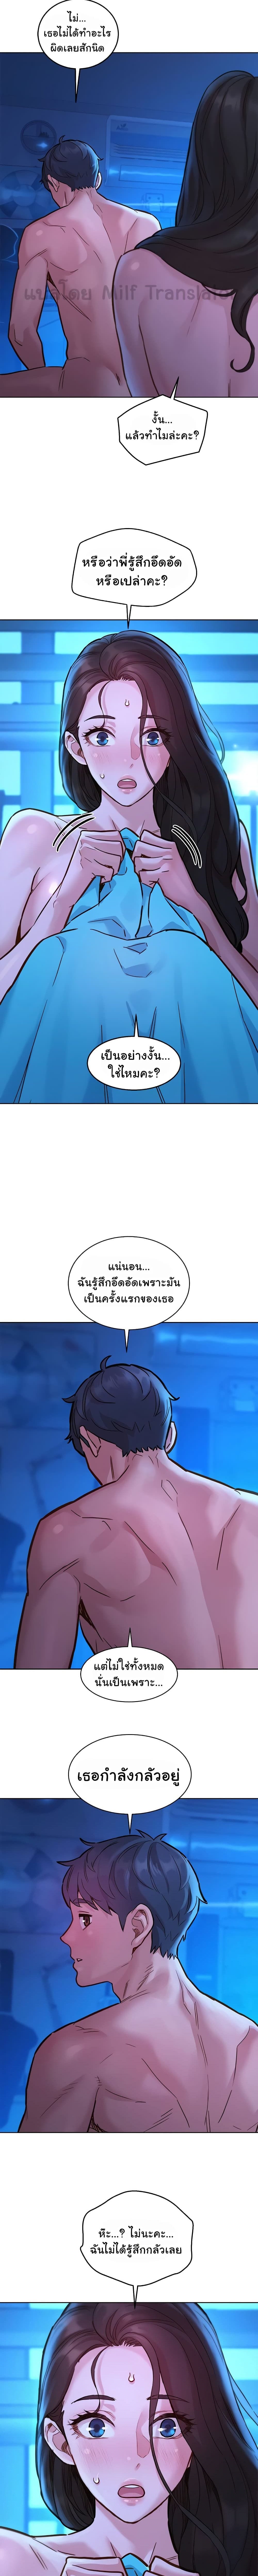 Let’s Hang Out from Today ตอนที่ 46 ภาพ 2